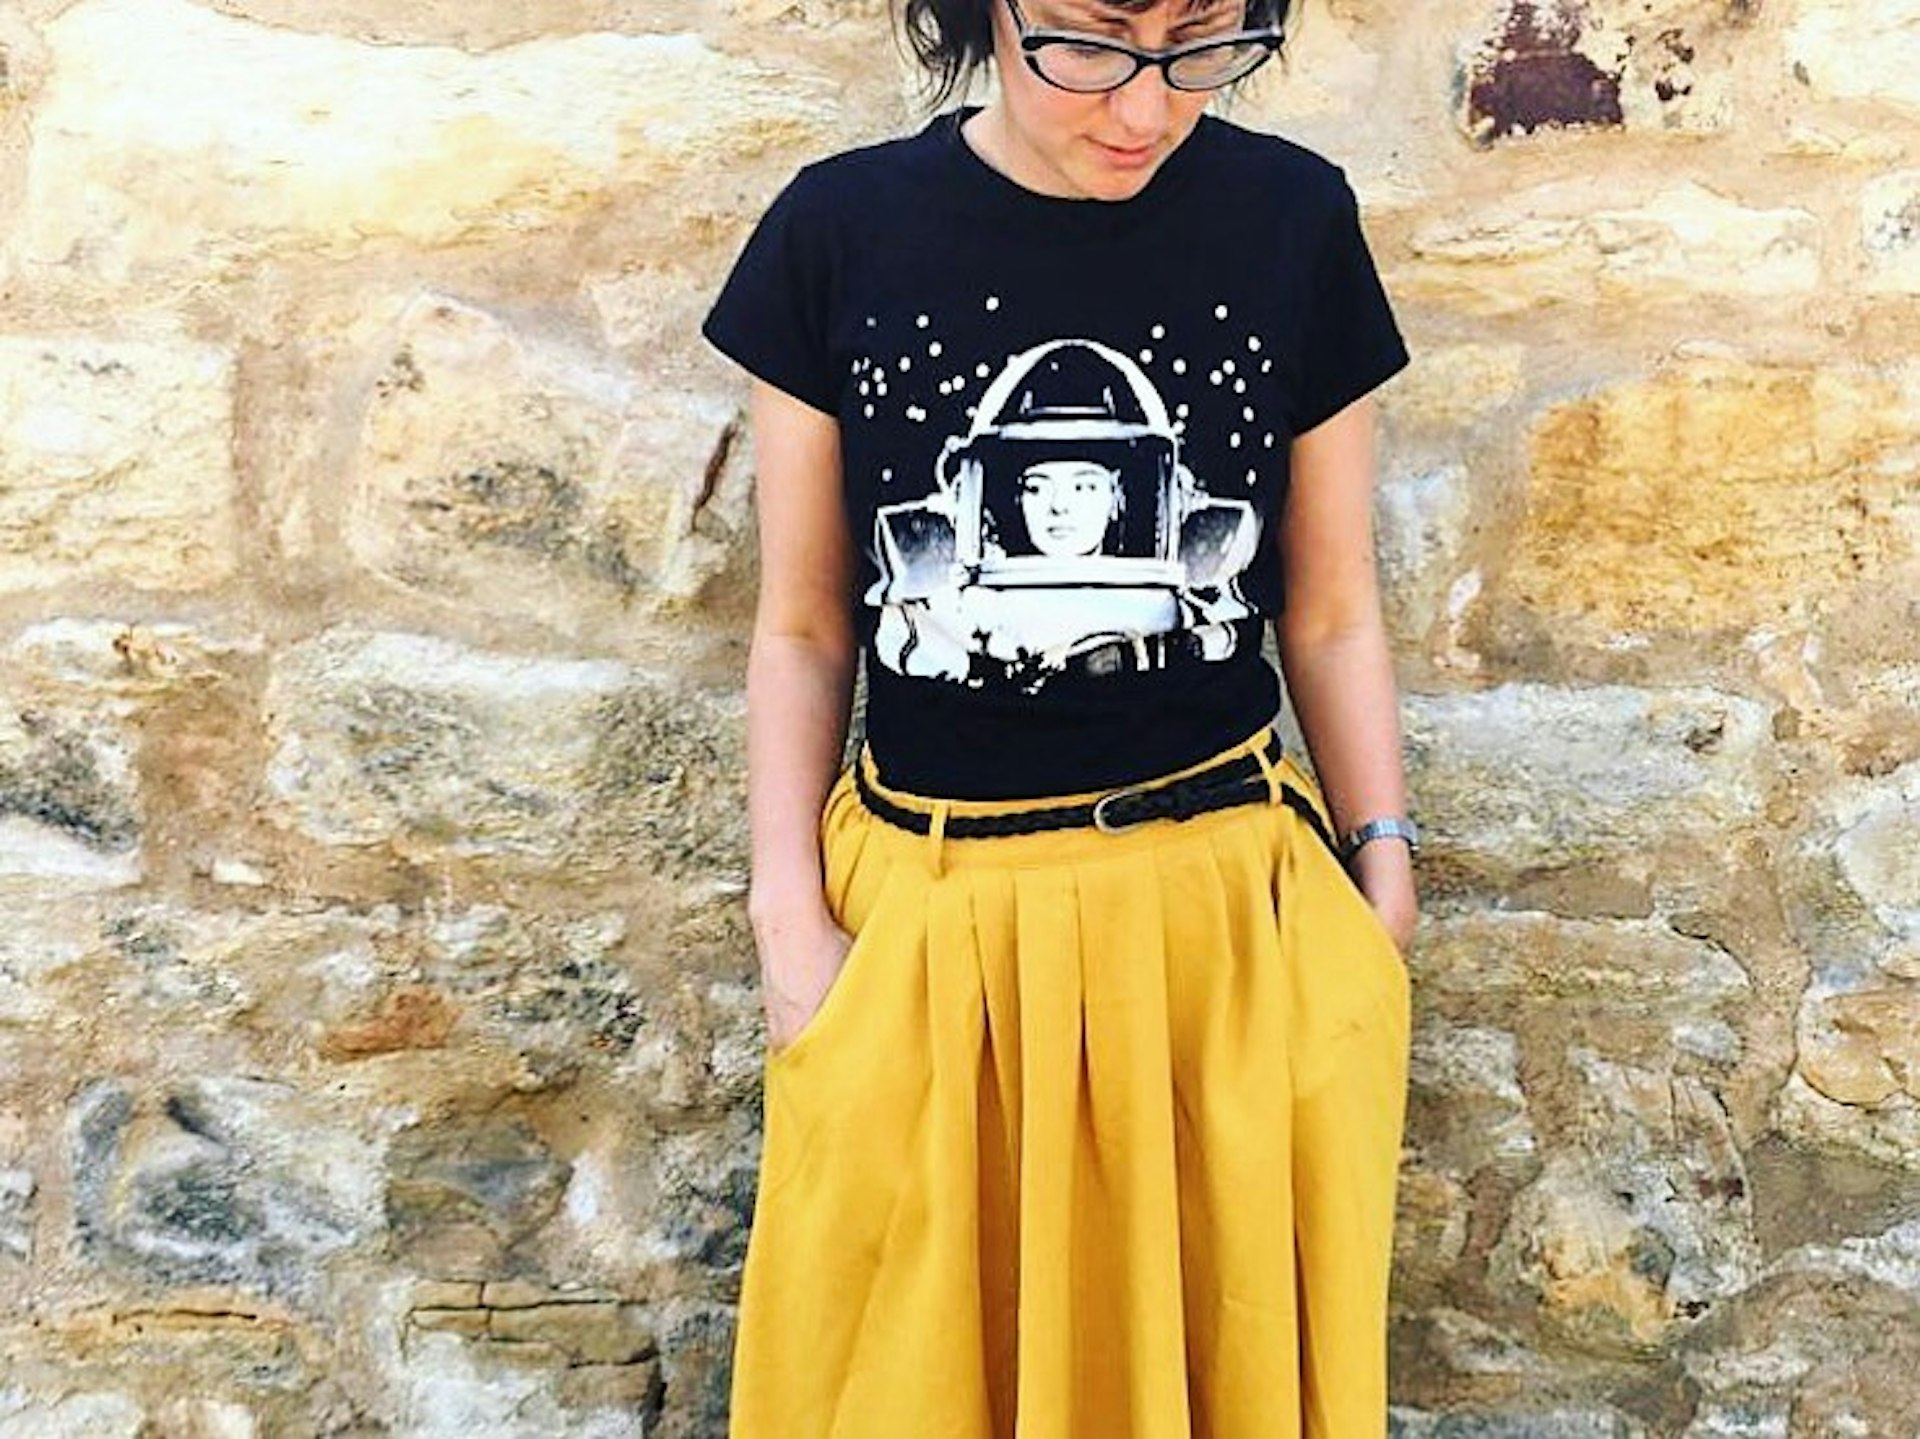 Jenny Elliott standing against a sandstone wall in a black t-shirt and yellow skirt